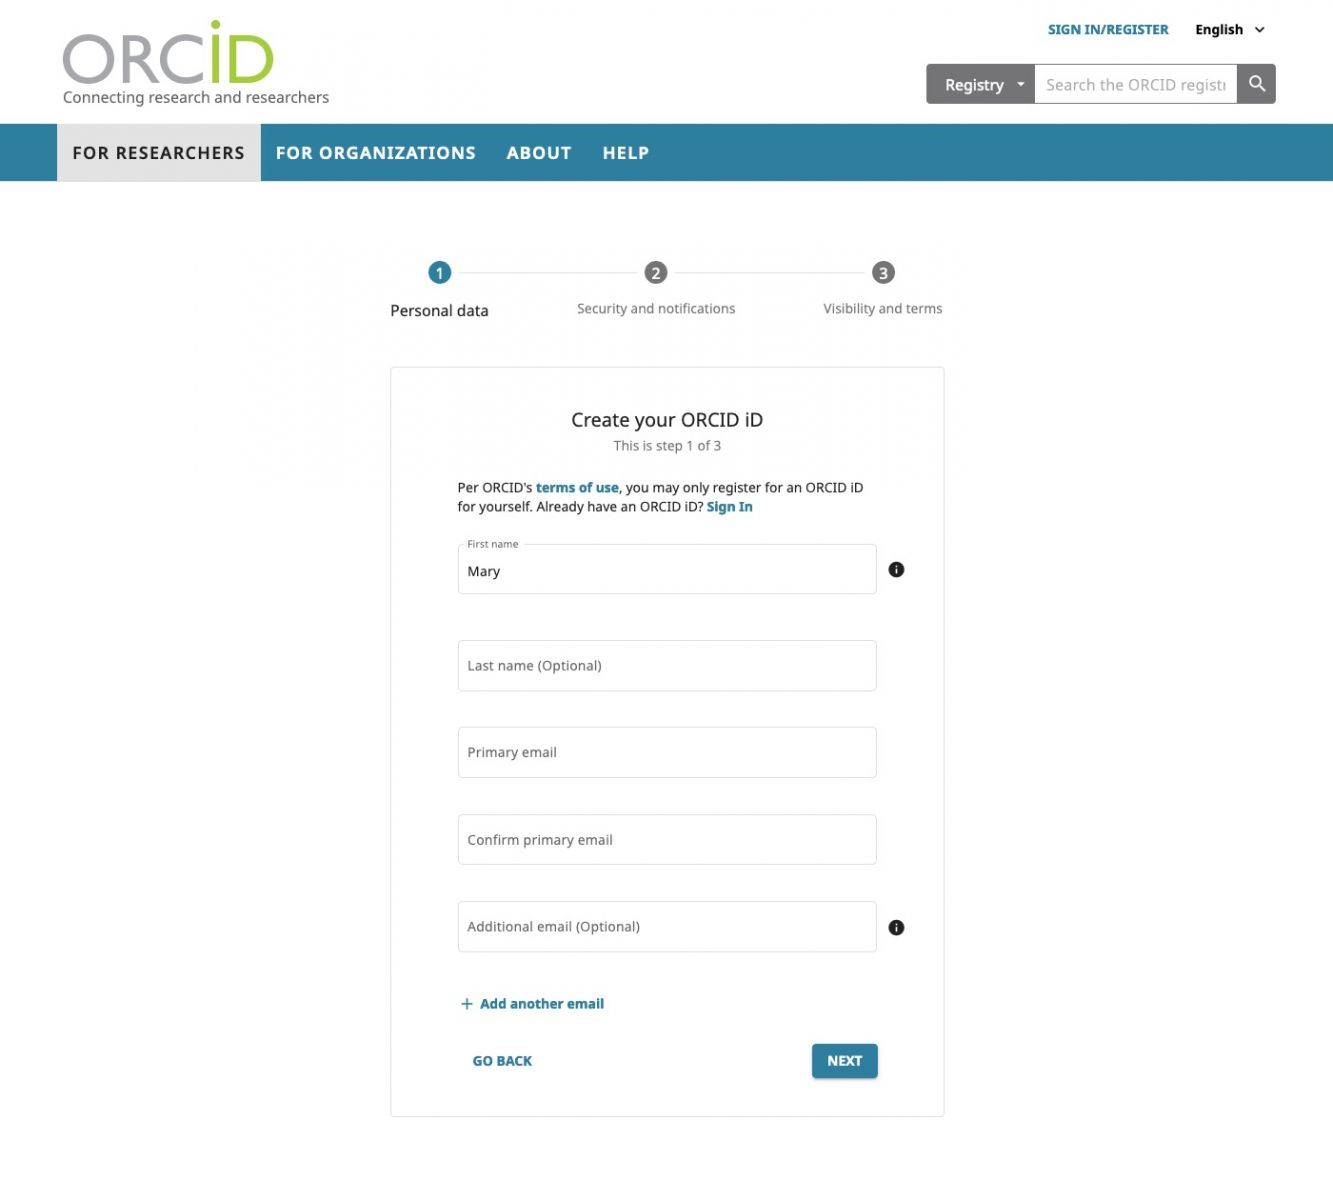 Step one of ORCID's Registration process